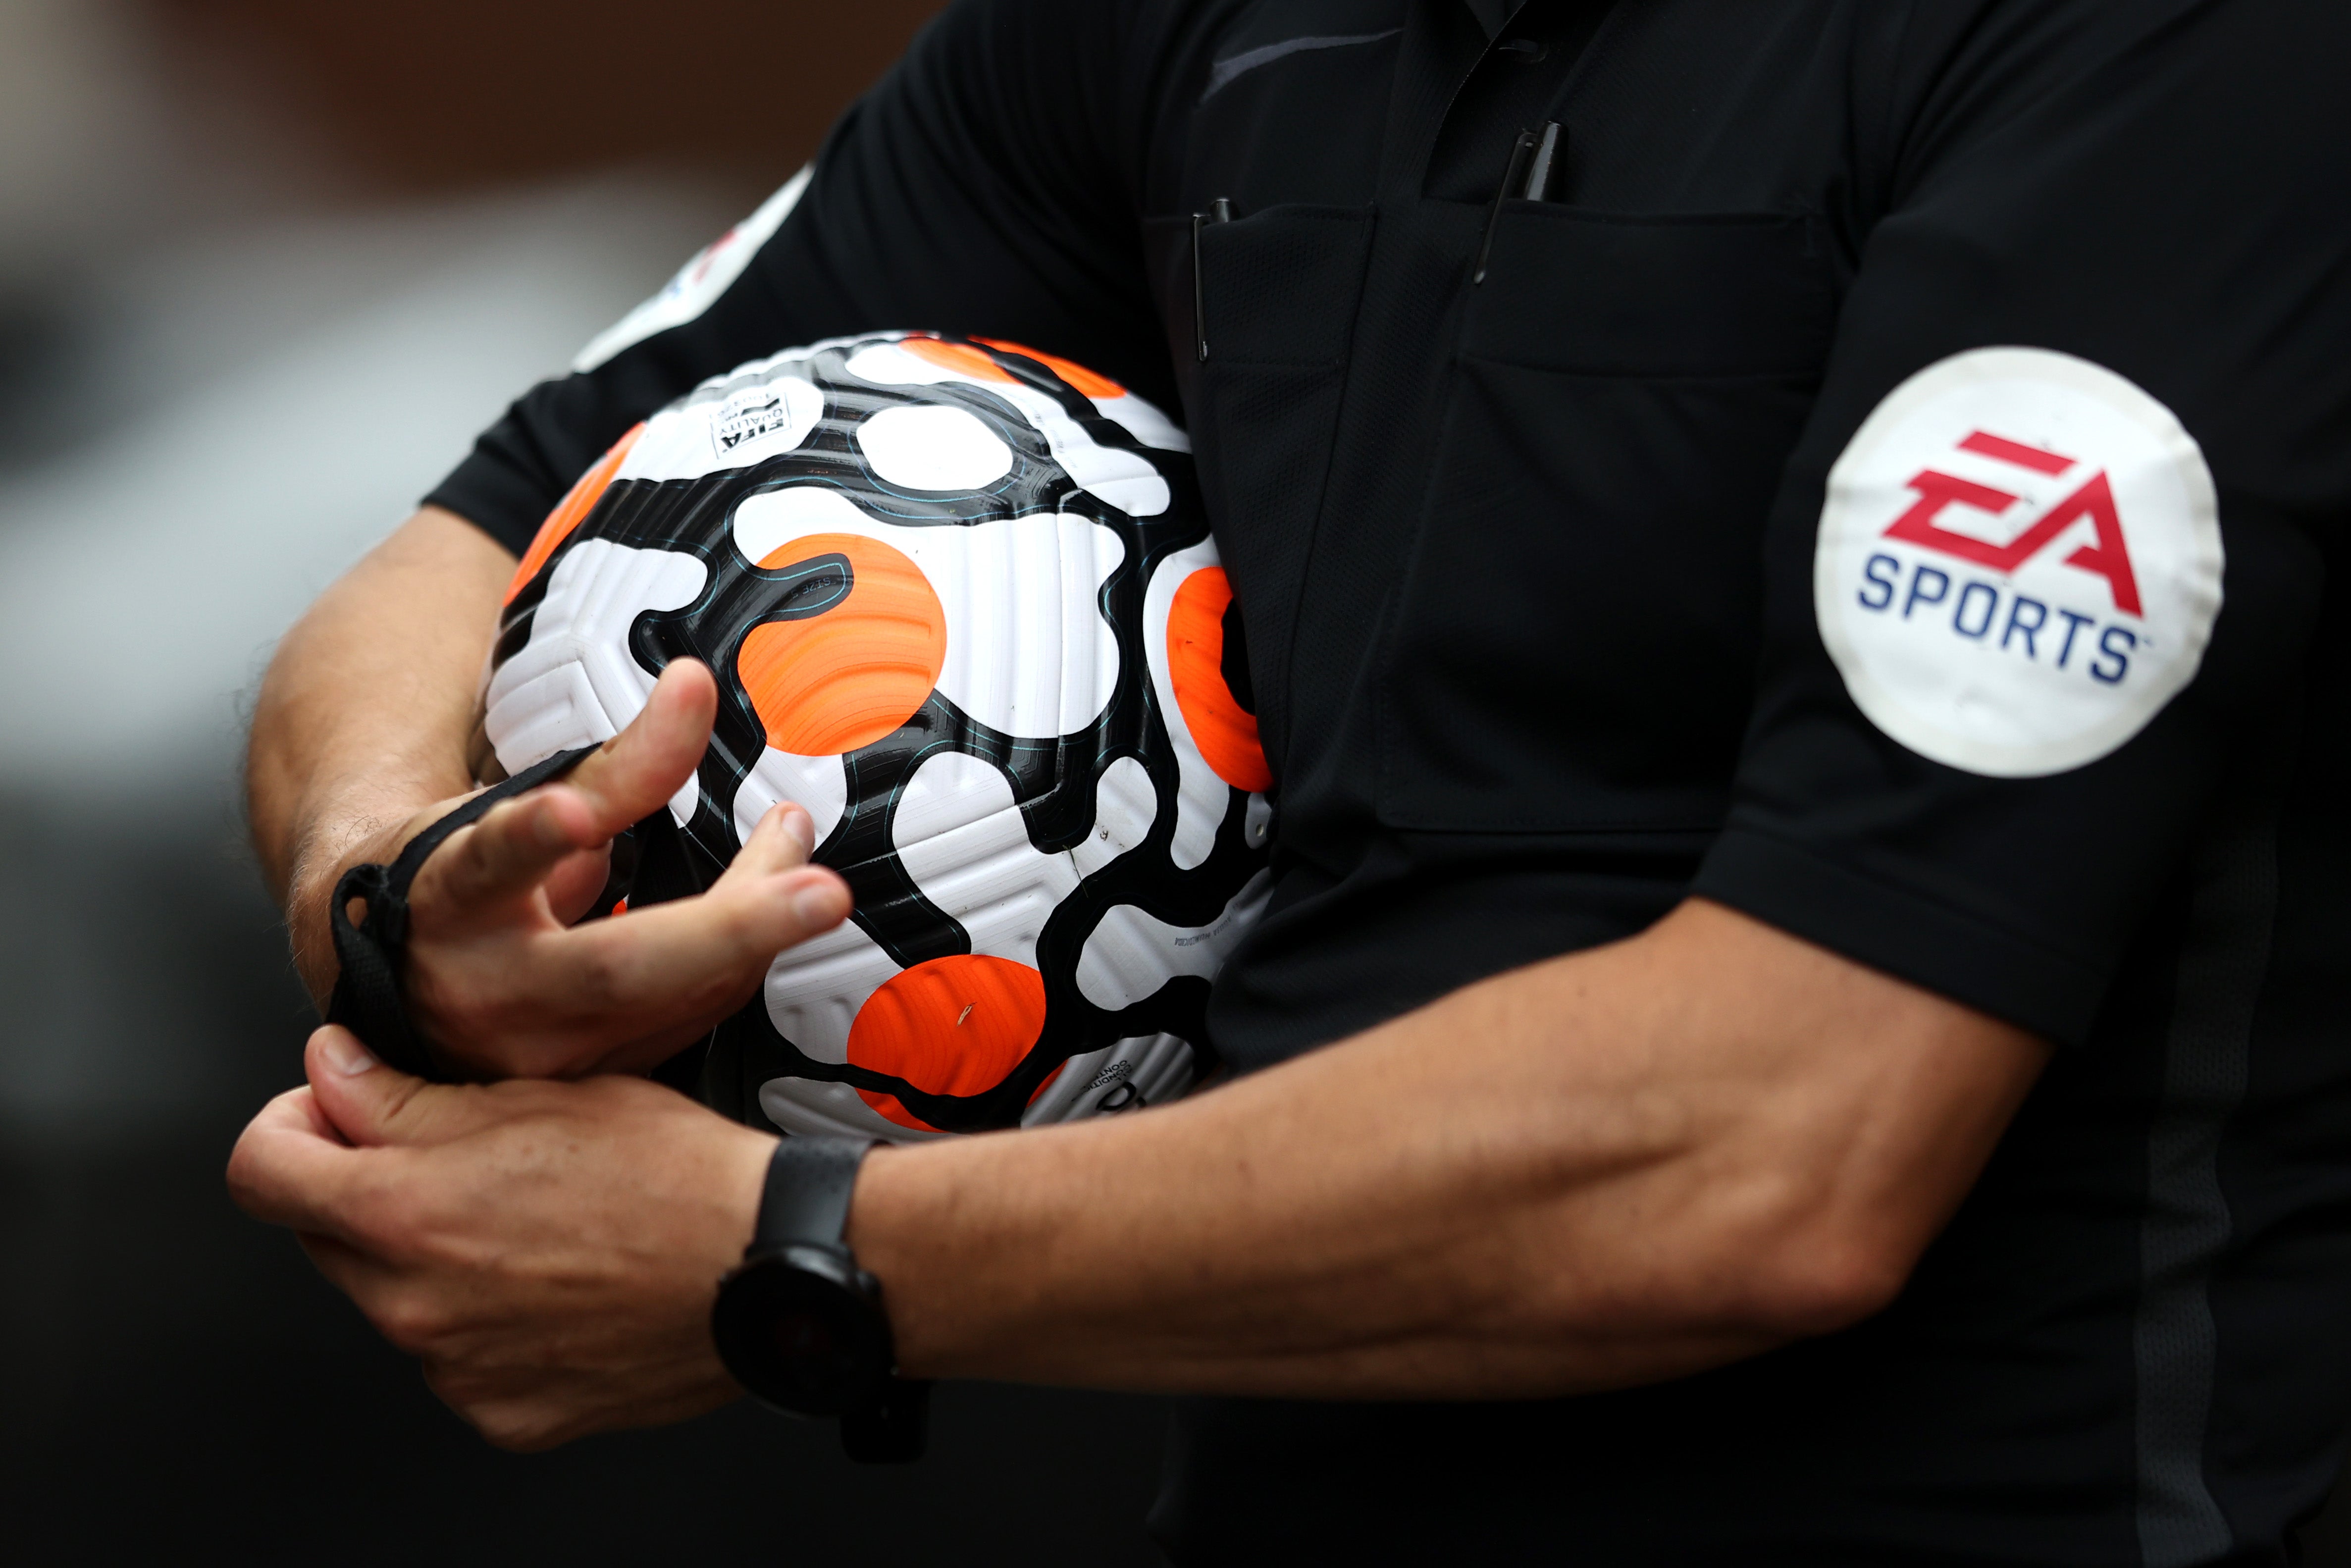 Modern footballs are said to be no better for reducing head injuries